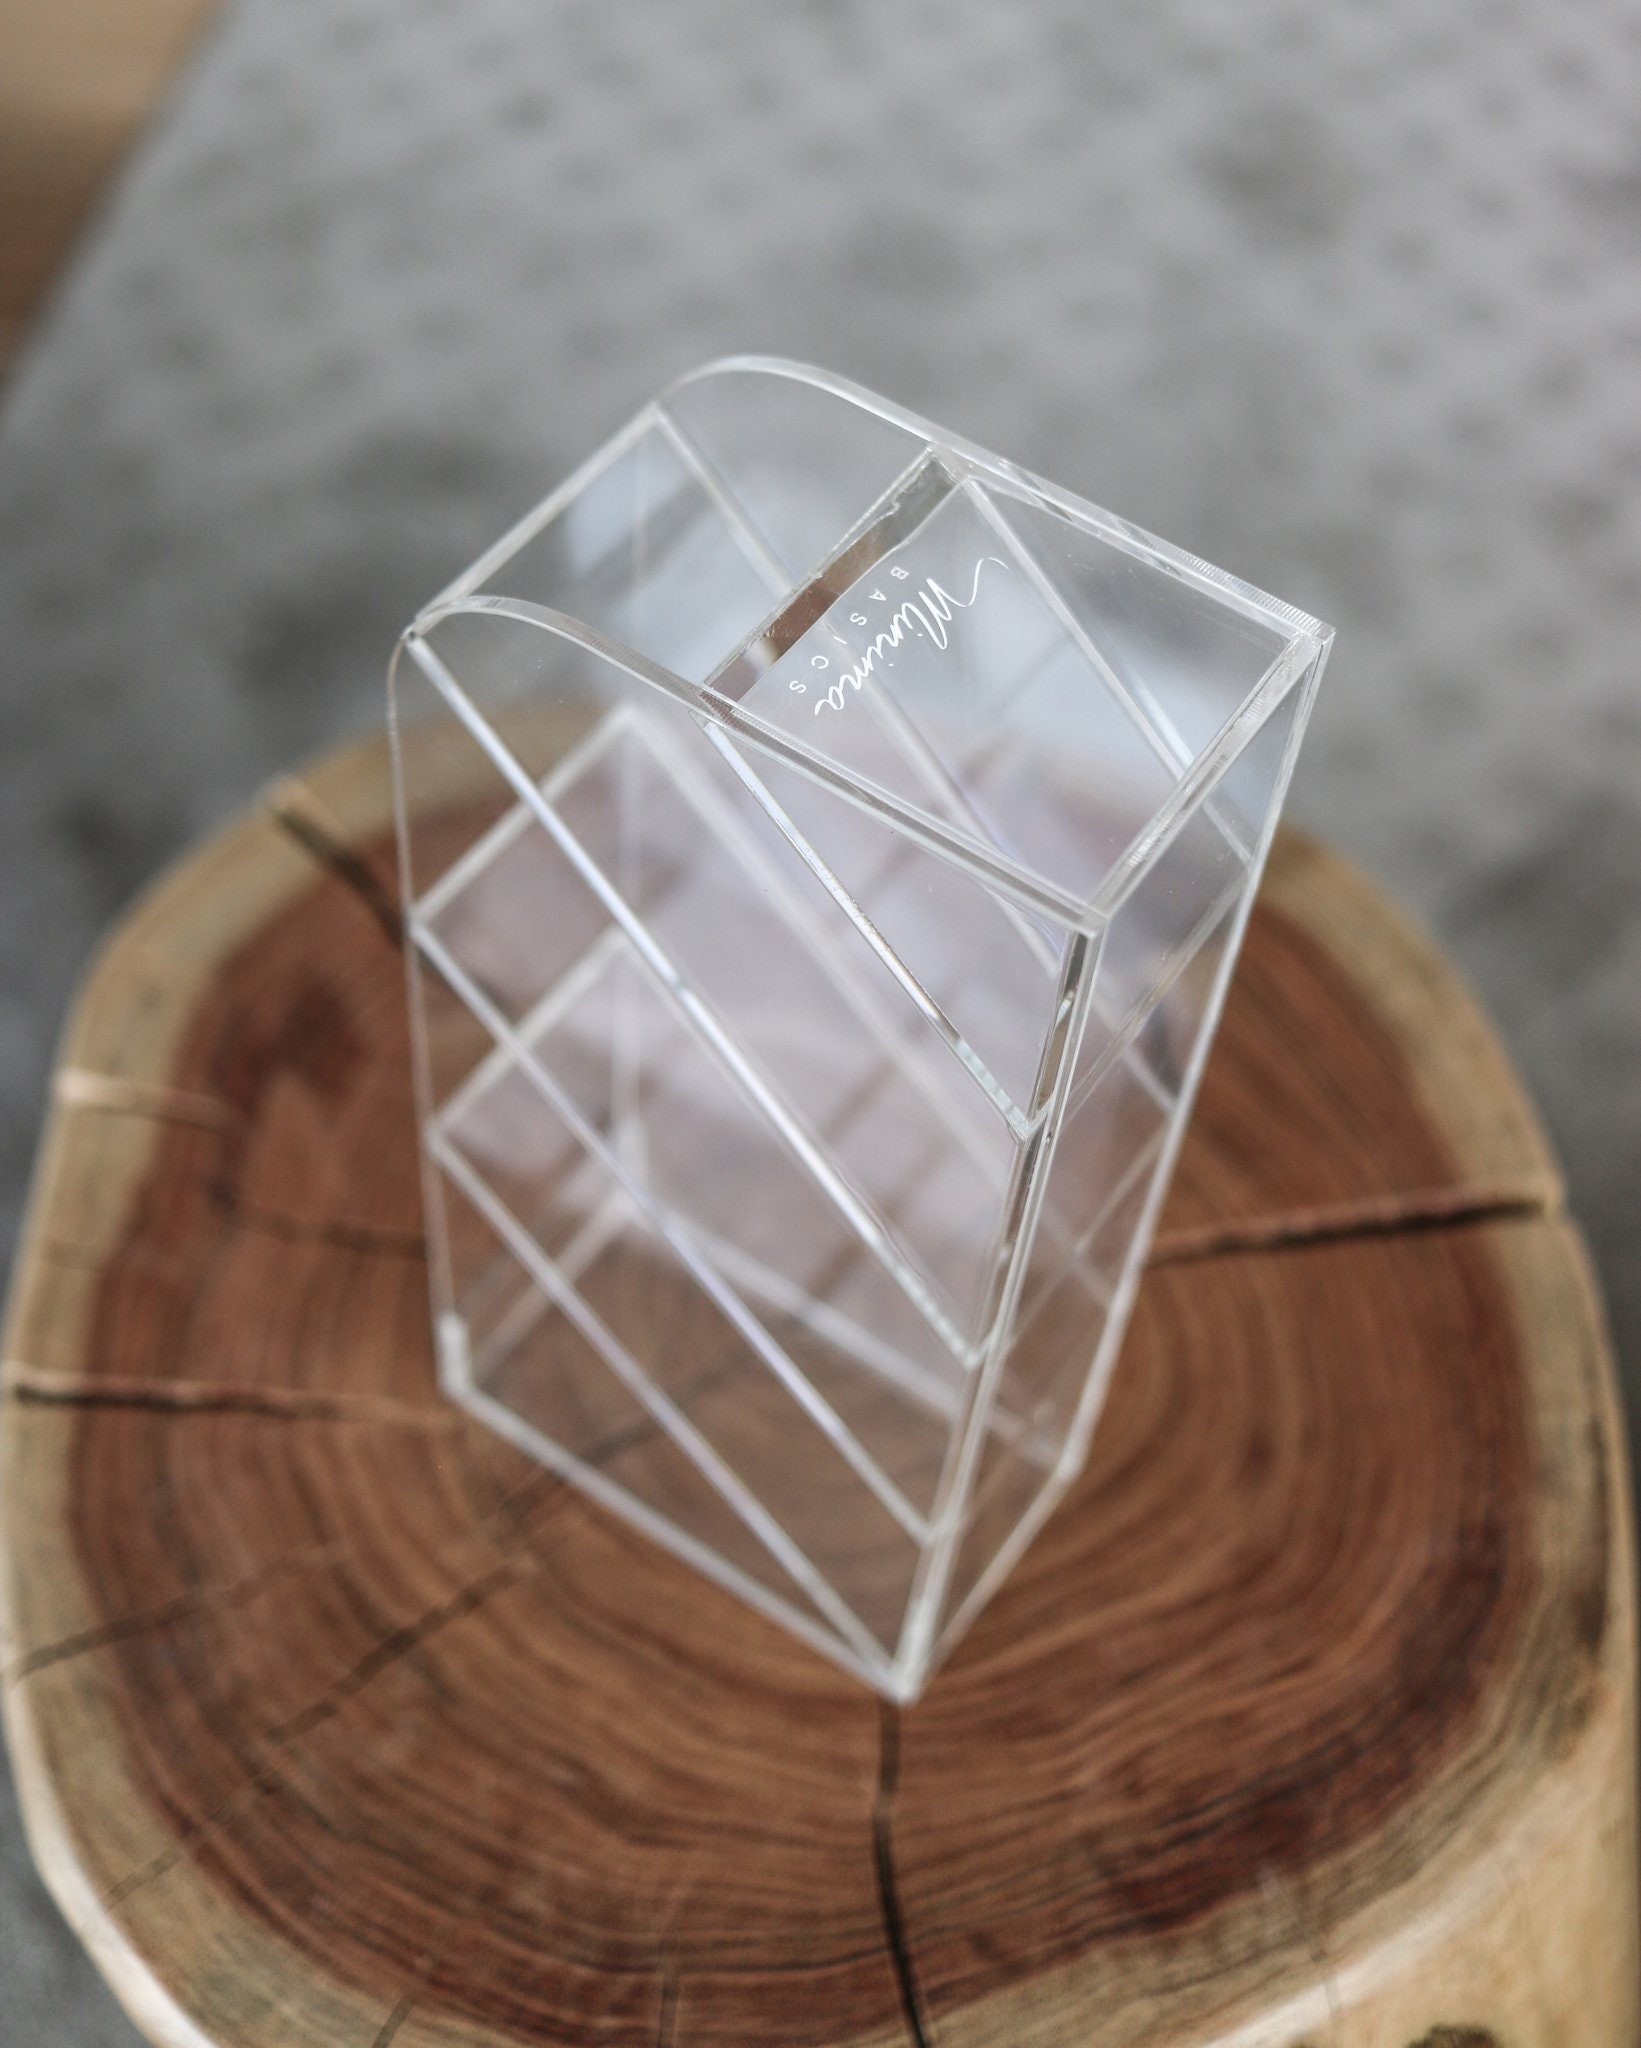 4-Section Acrylic Slanted Pen Organizer Clear, 1-3/4 x 3-3/8 x 6 H | The Container Store